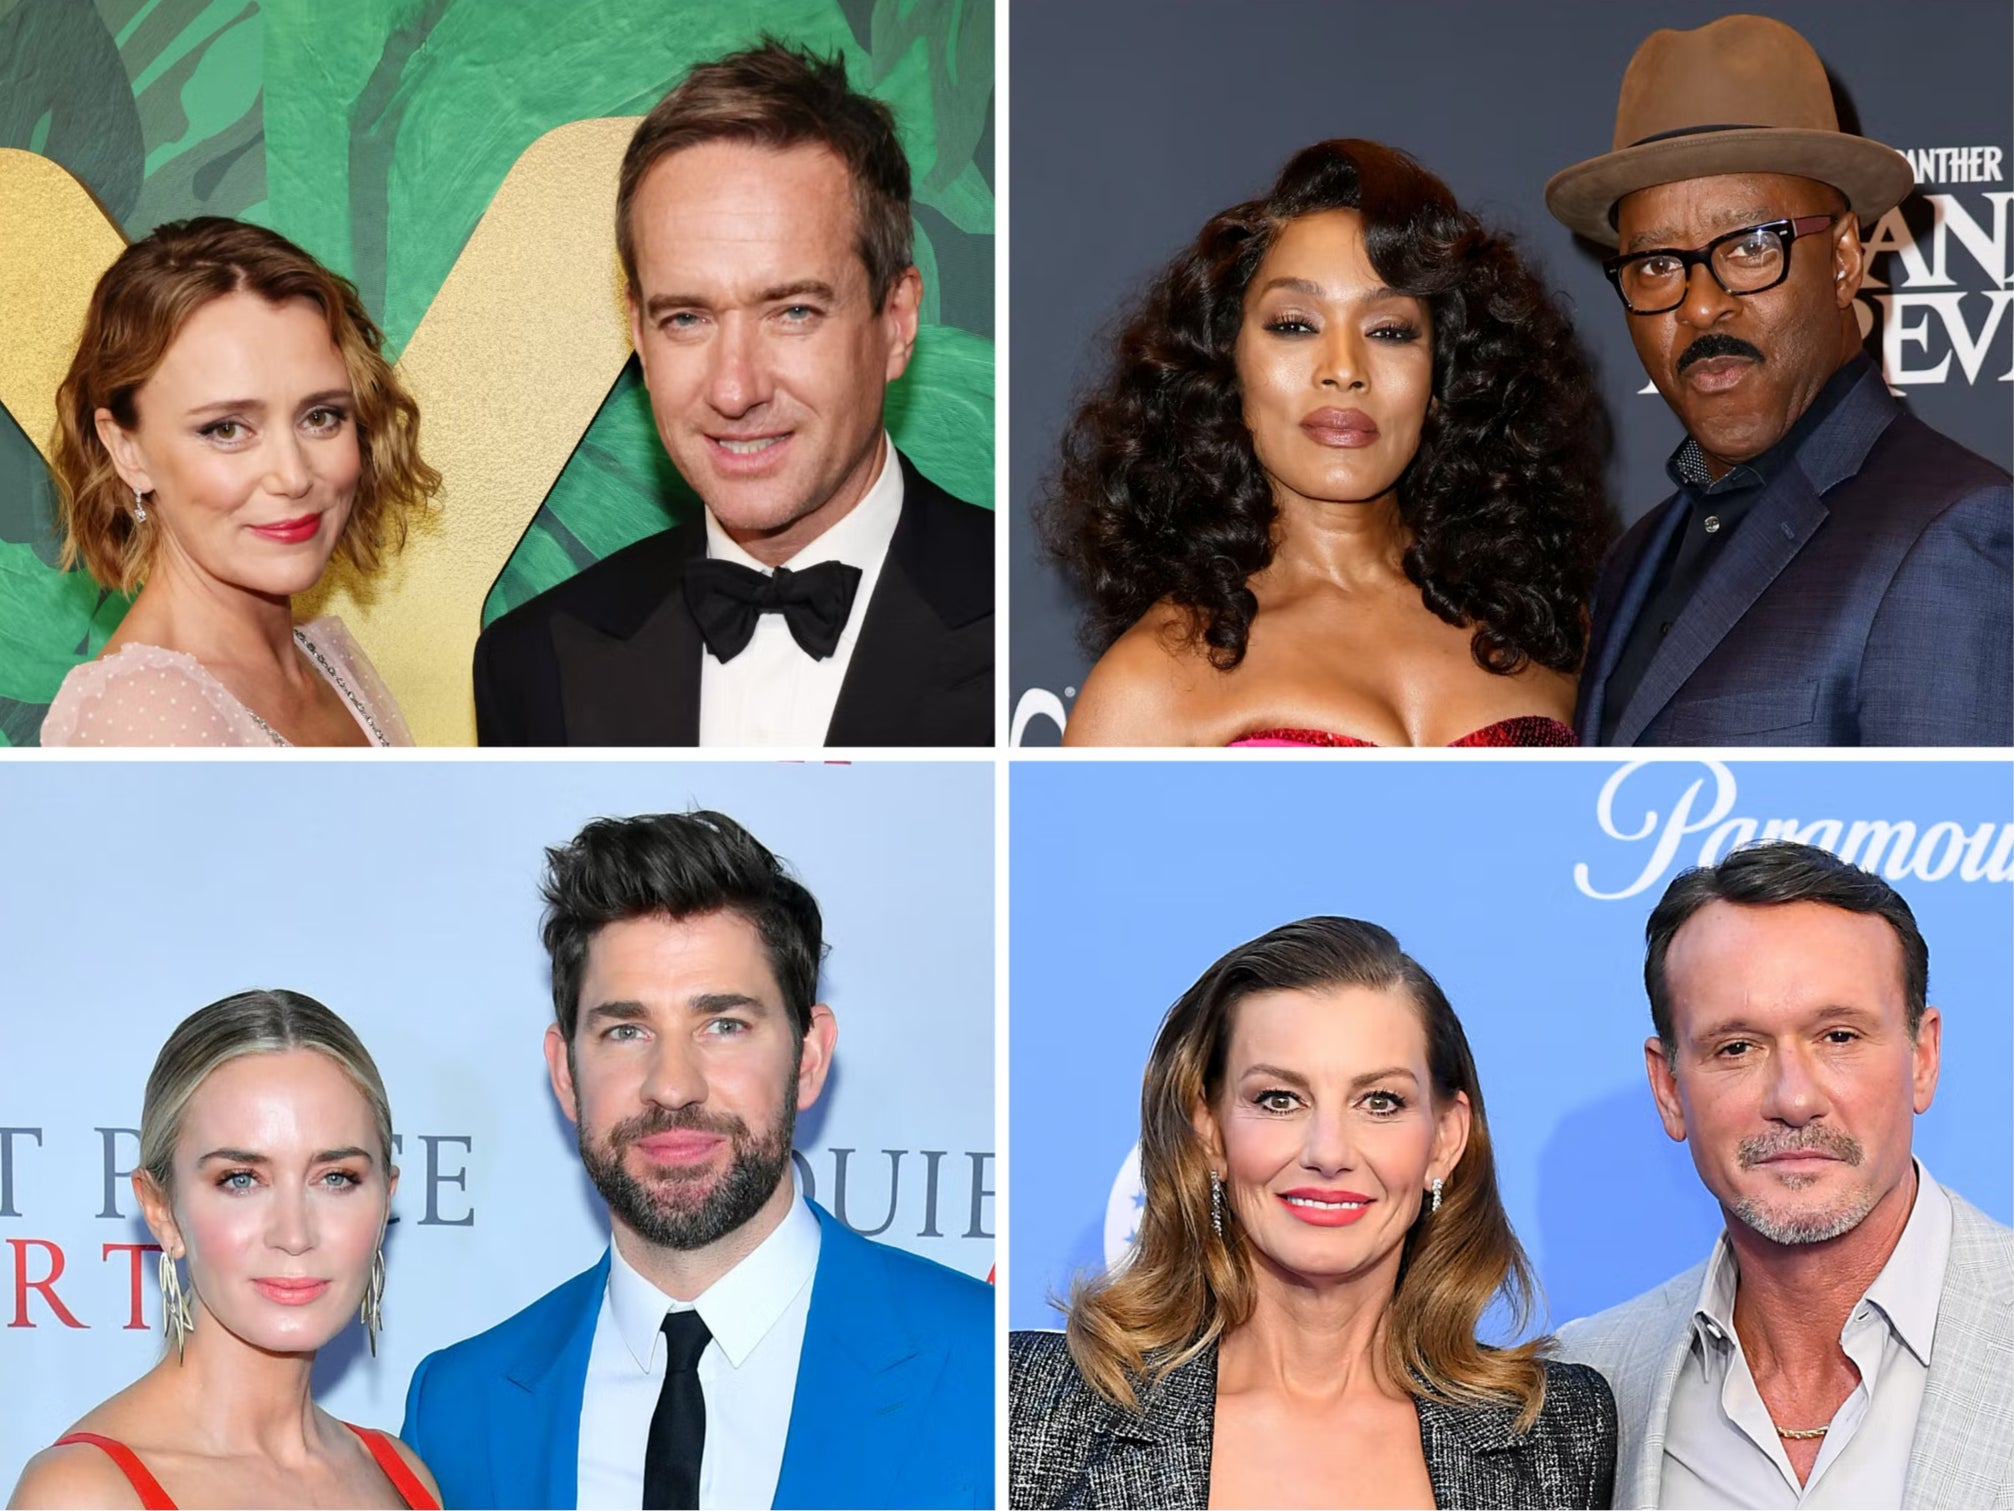 Couples who’ve brought their romance to the screen: (Clockwise from top left) Keeley Hawes and Matthew Macfadyen, Angela Bassett and Courtney B Vance, Emily Blunt and John Krasinski, Faith Hill and Tim McGraw